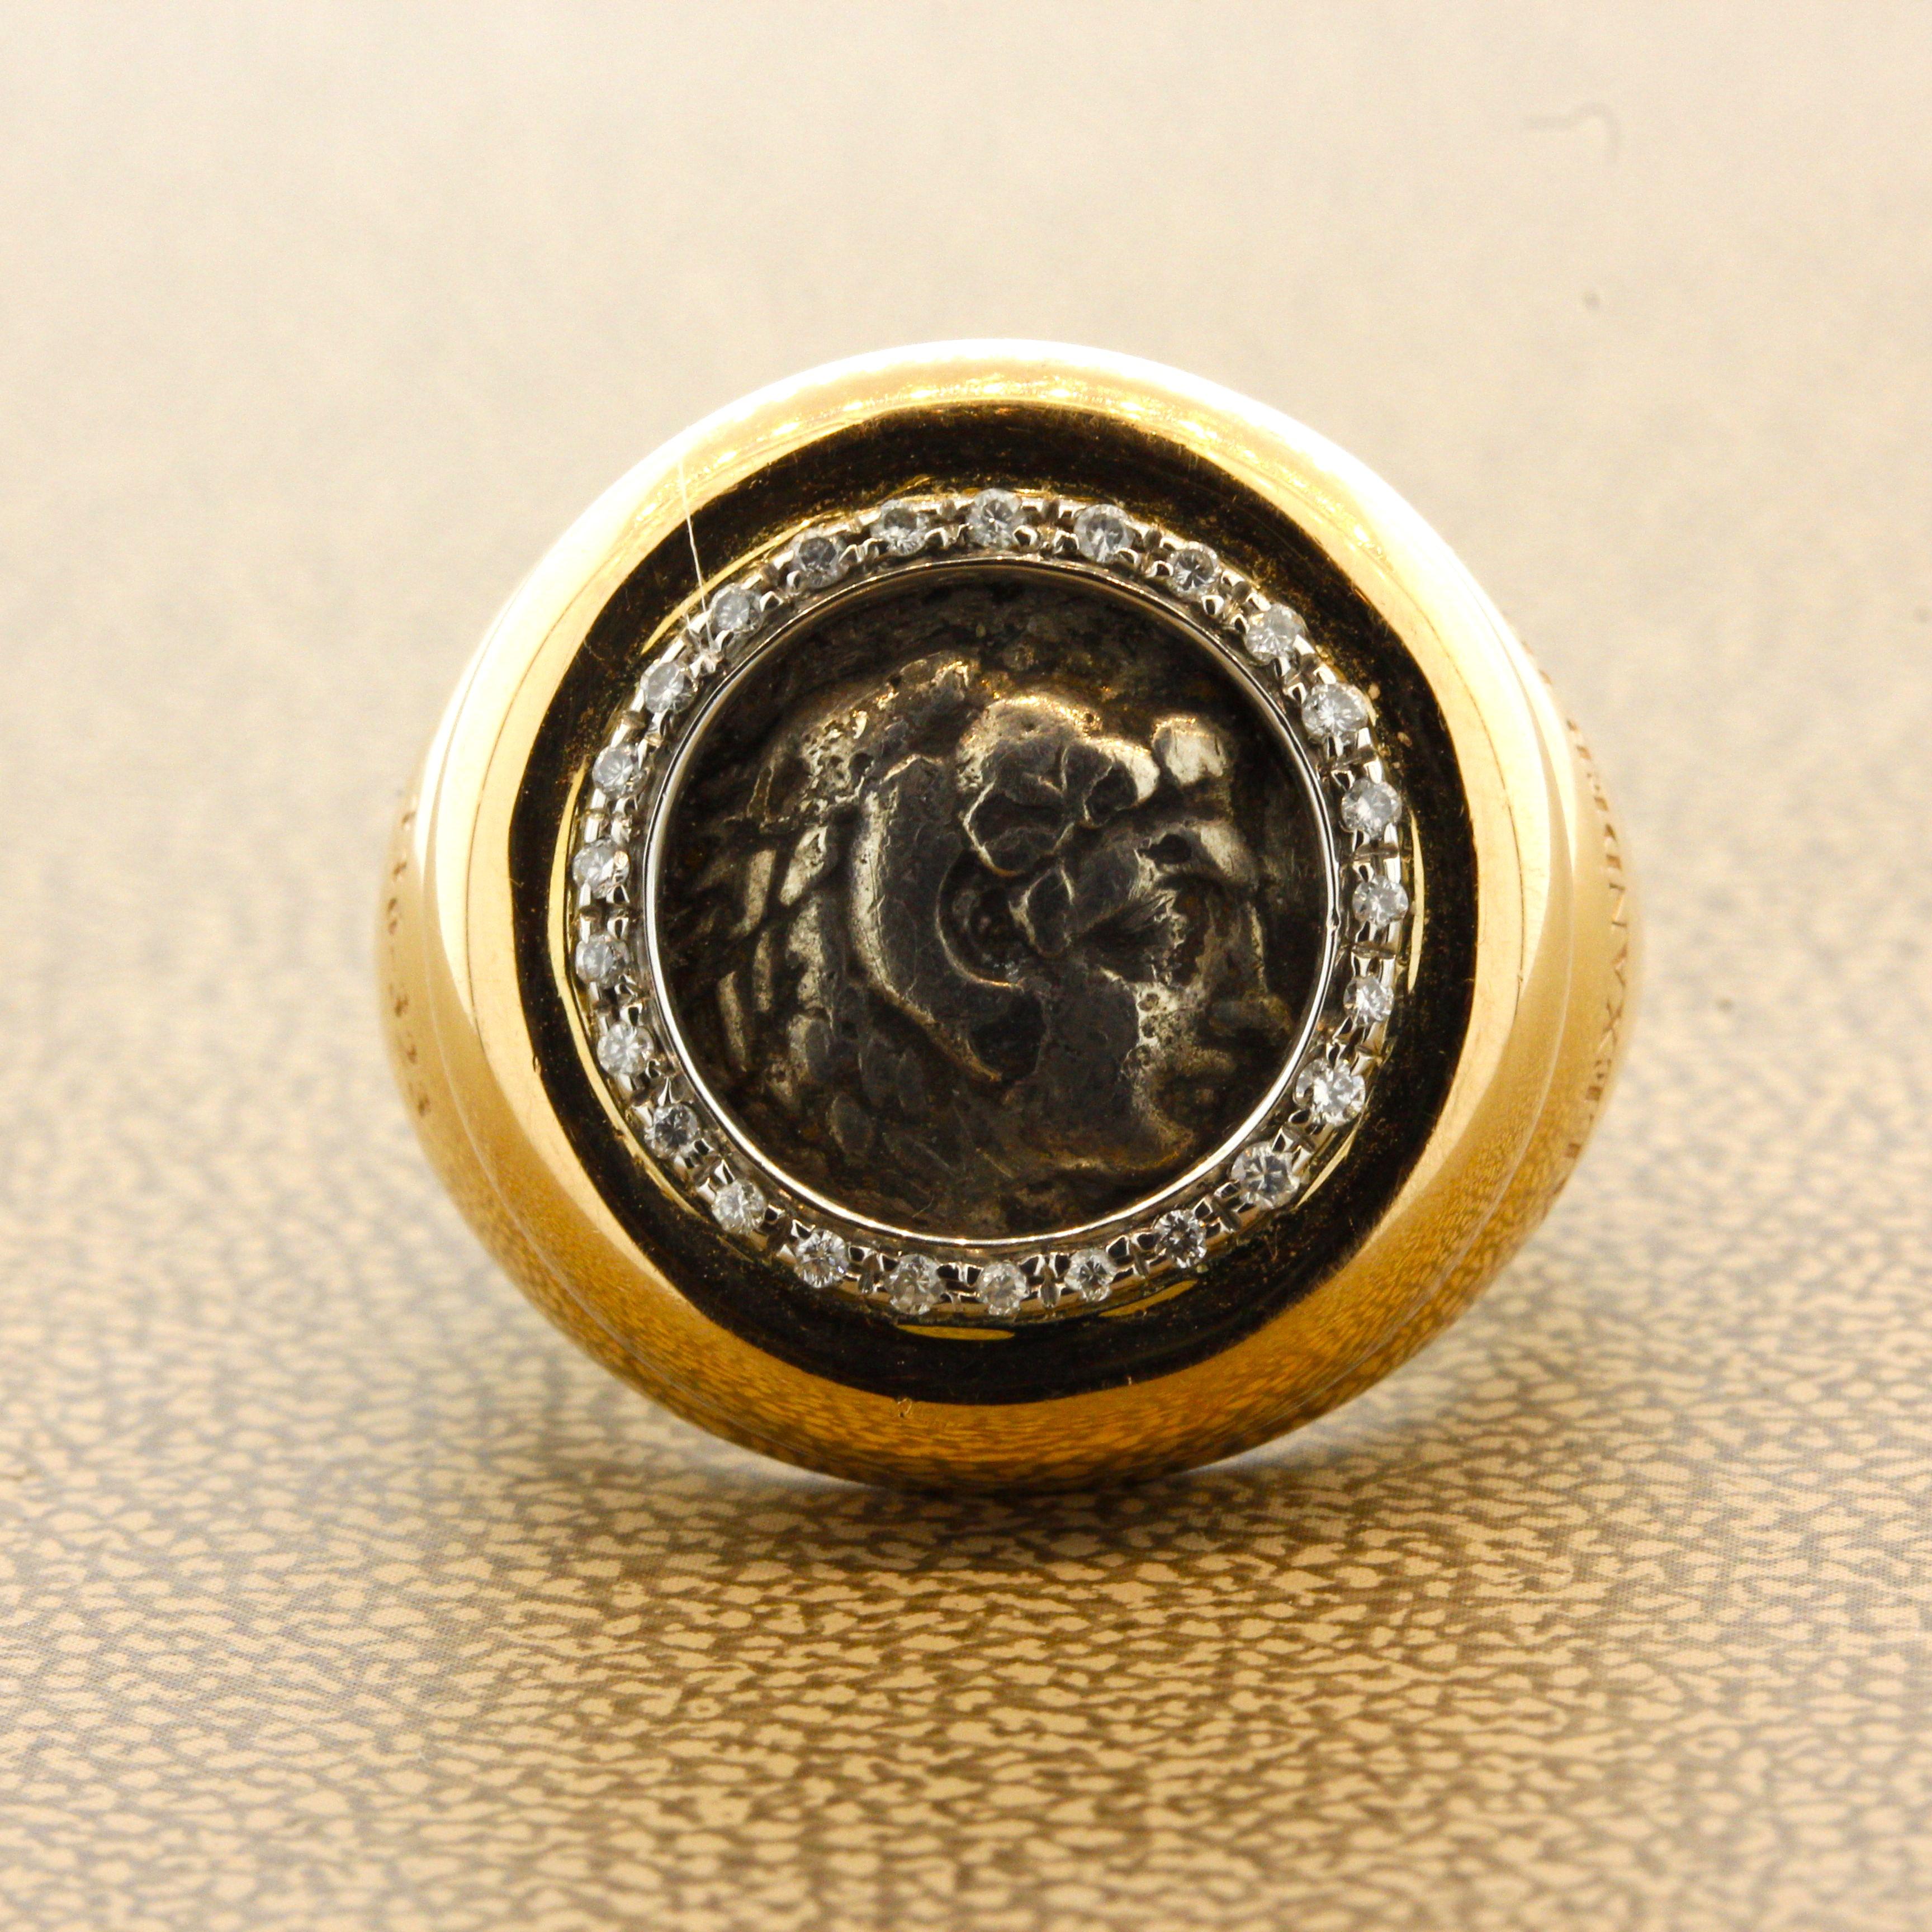 A piece of ancient history! This modern made gold ring features an ancient coin from the Roman empire almost 2,000 years old! It is from the time of Alexander the 3rd from the year 323 to 336. It is complemented by 0.14 carats of round brilliant-cut